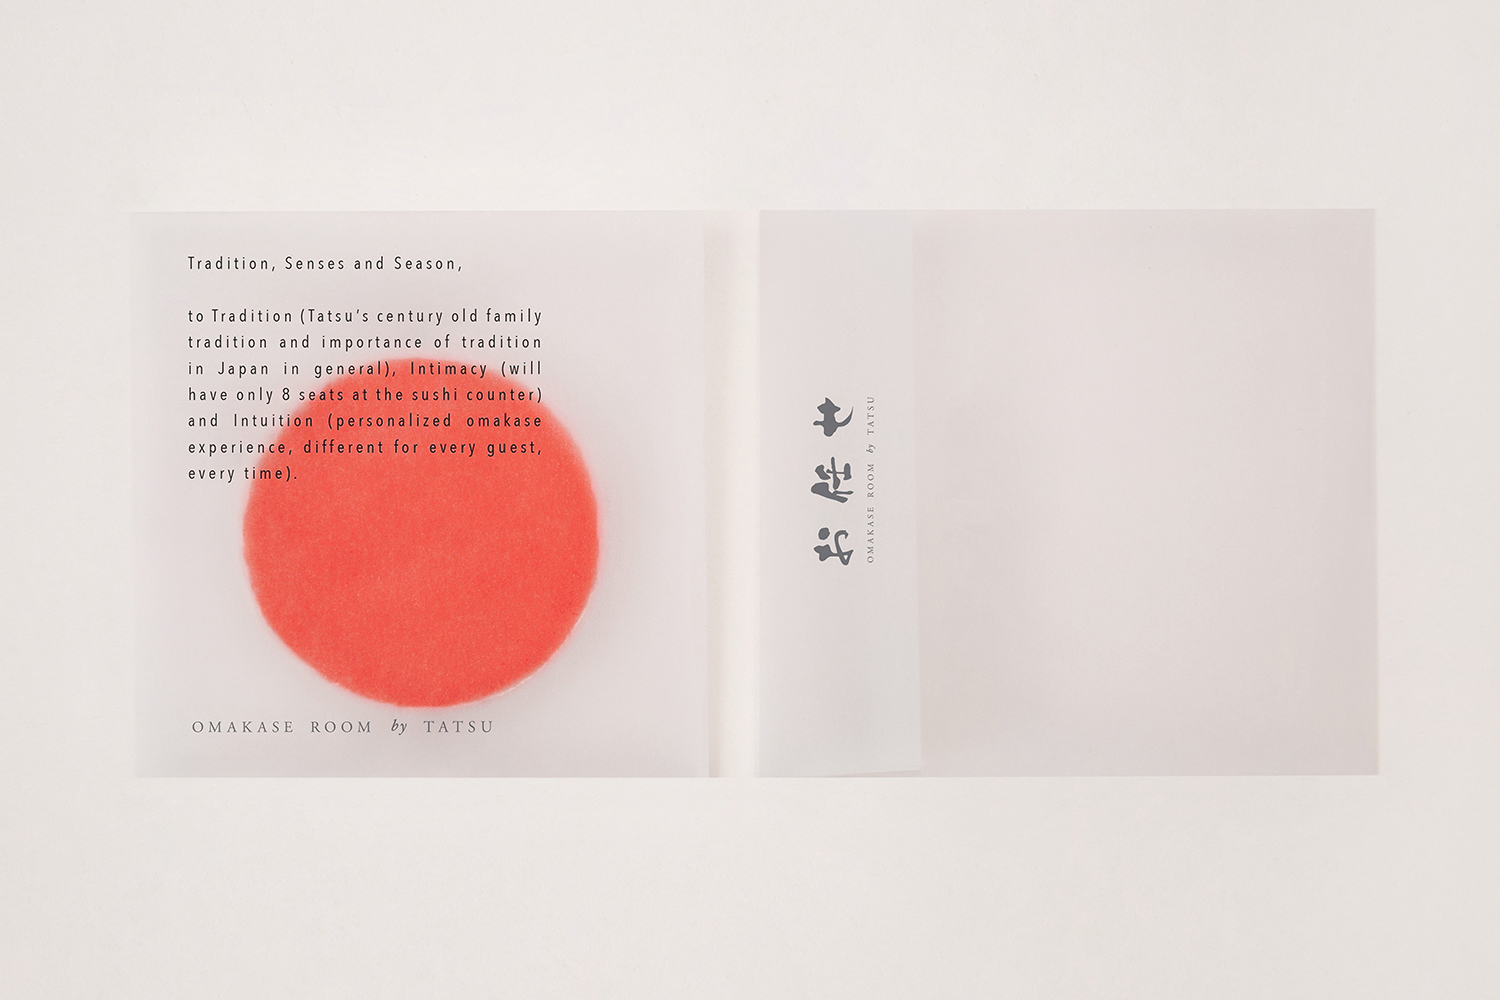 Material Thinking in Branding — Omakase Room by Tatsu by Savvy, United States